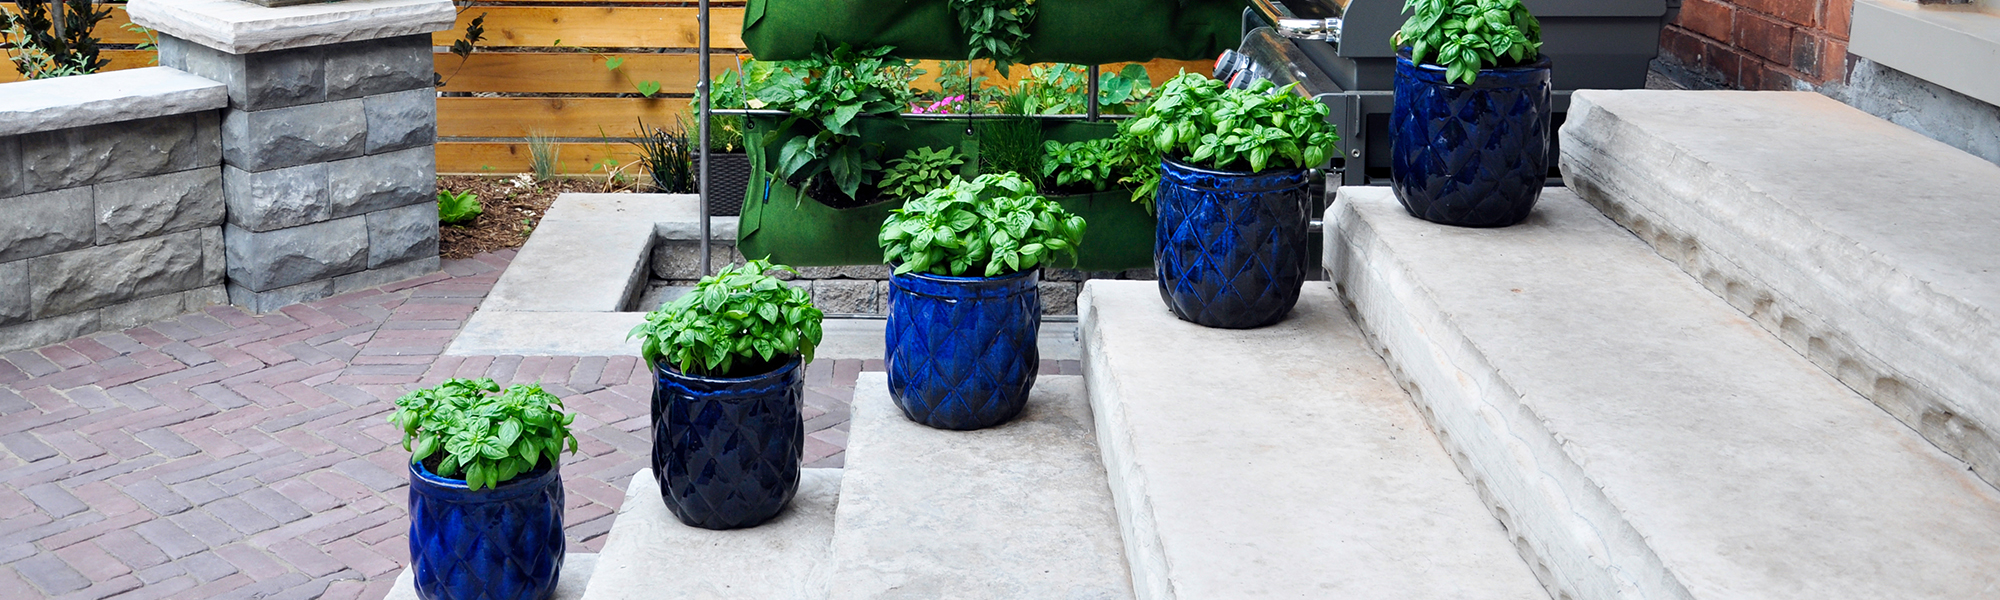 Plants in blue pots lined up along staircase